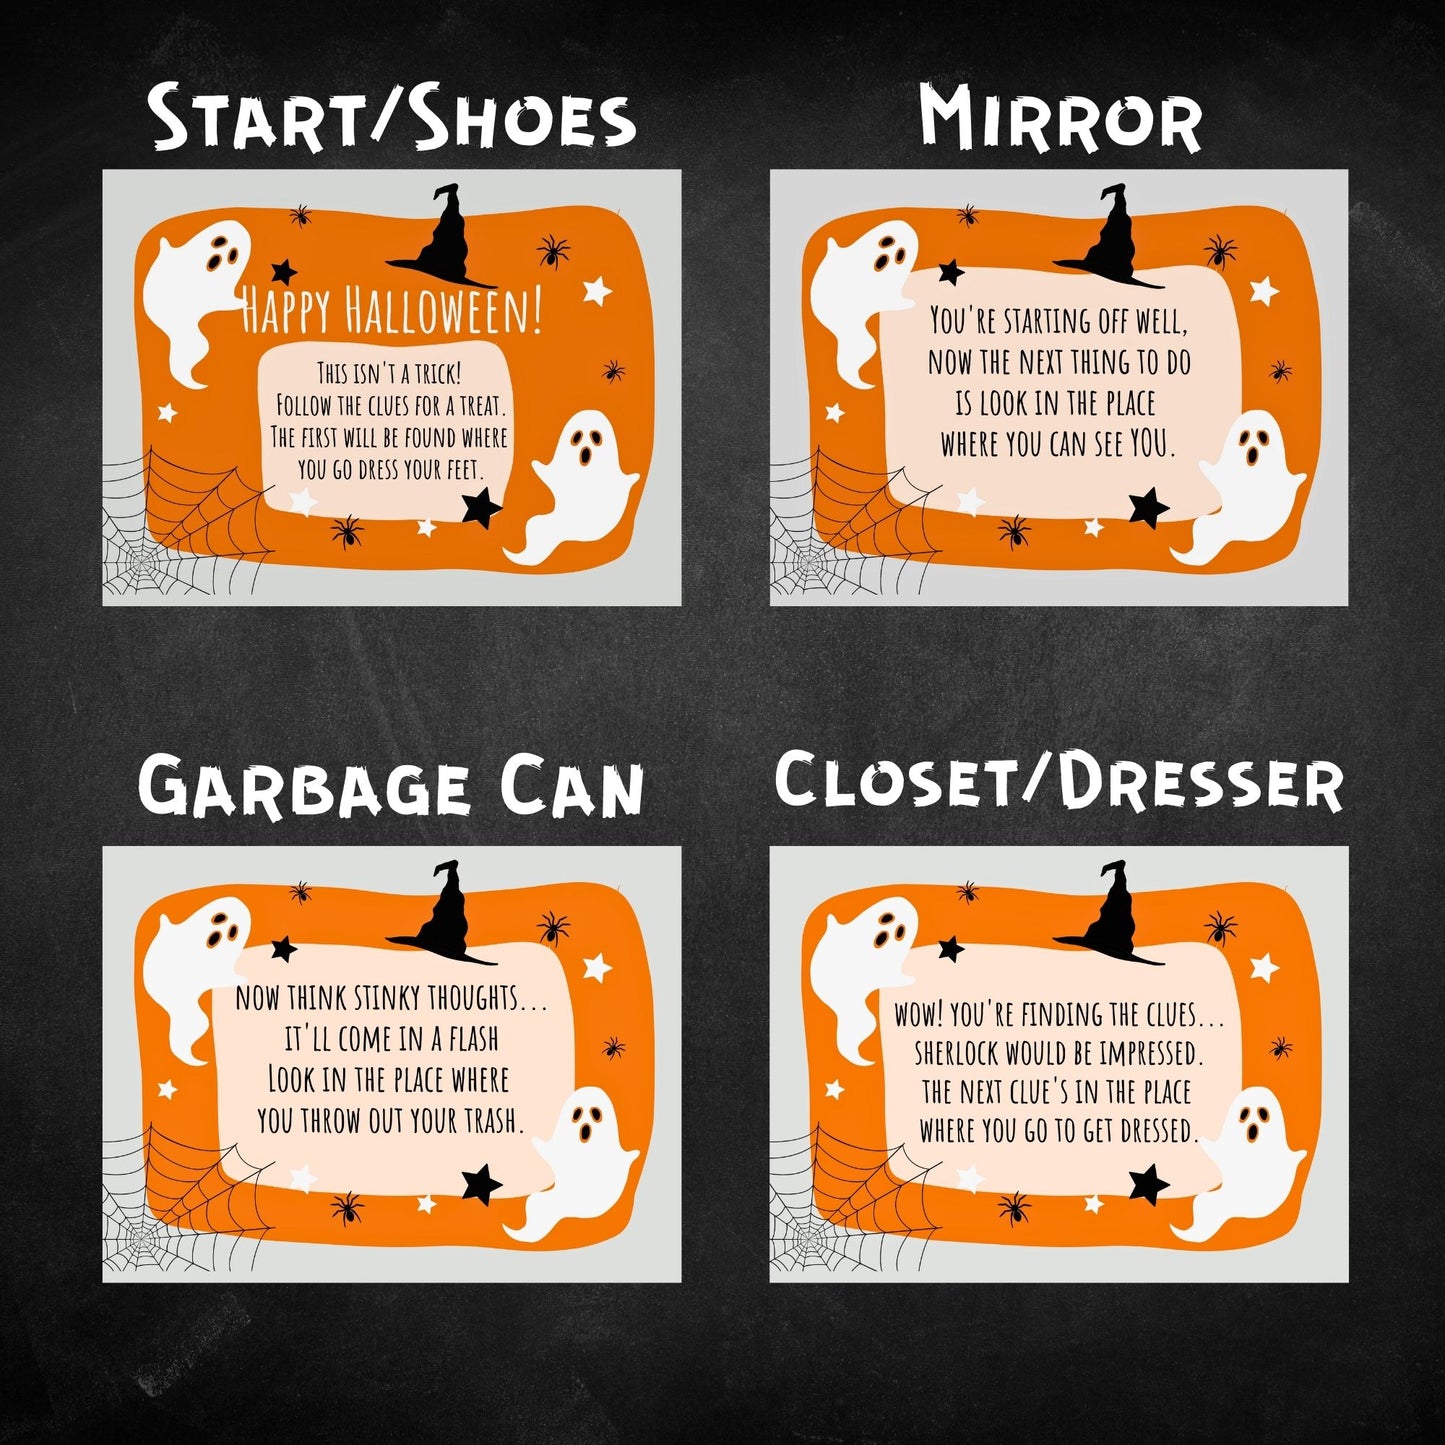 Four of the clue cards are displayed, leading to shoes, mirror, garbage can, and closet/dresser hiding places.